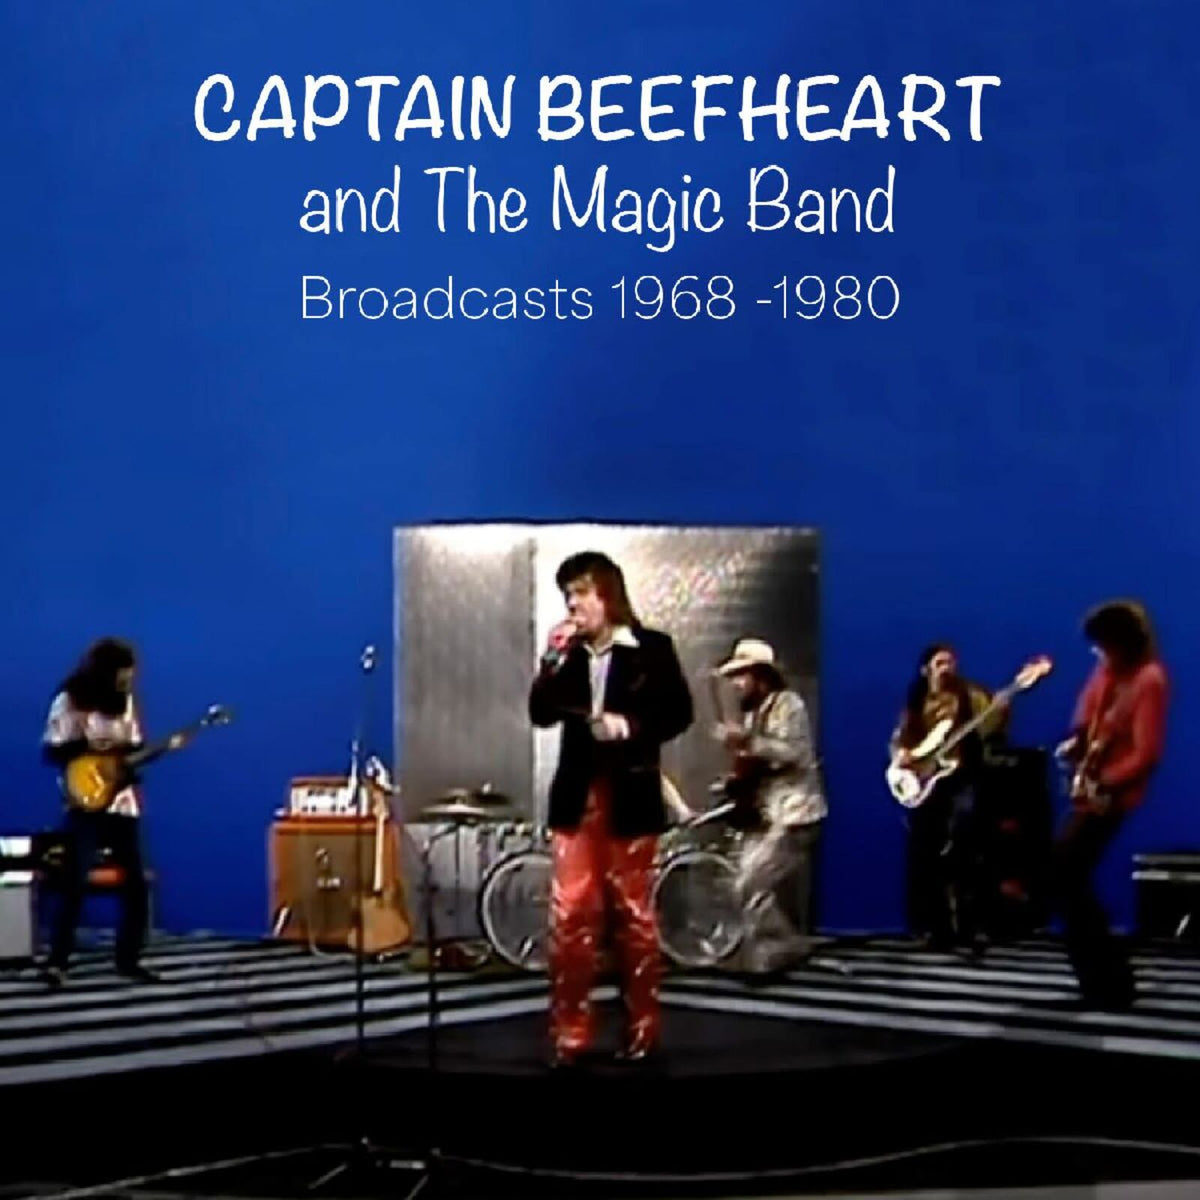 Captain Beefheart and the Magic Band - Broadcasts, 1968-1980 - FMGZ188CD